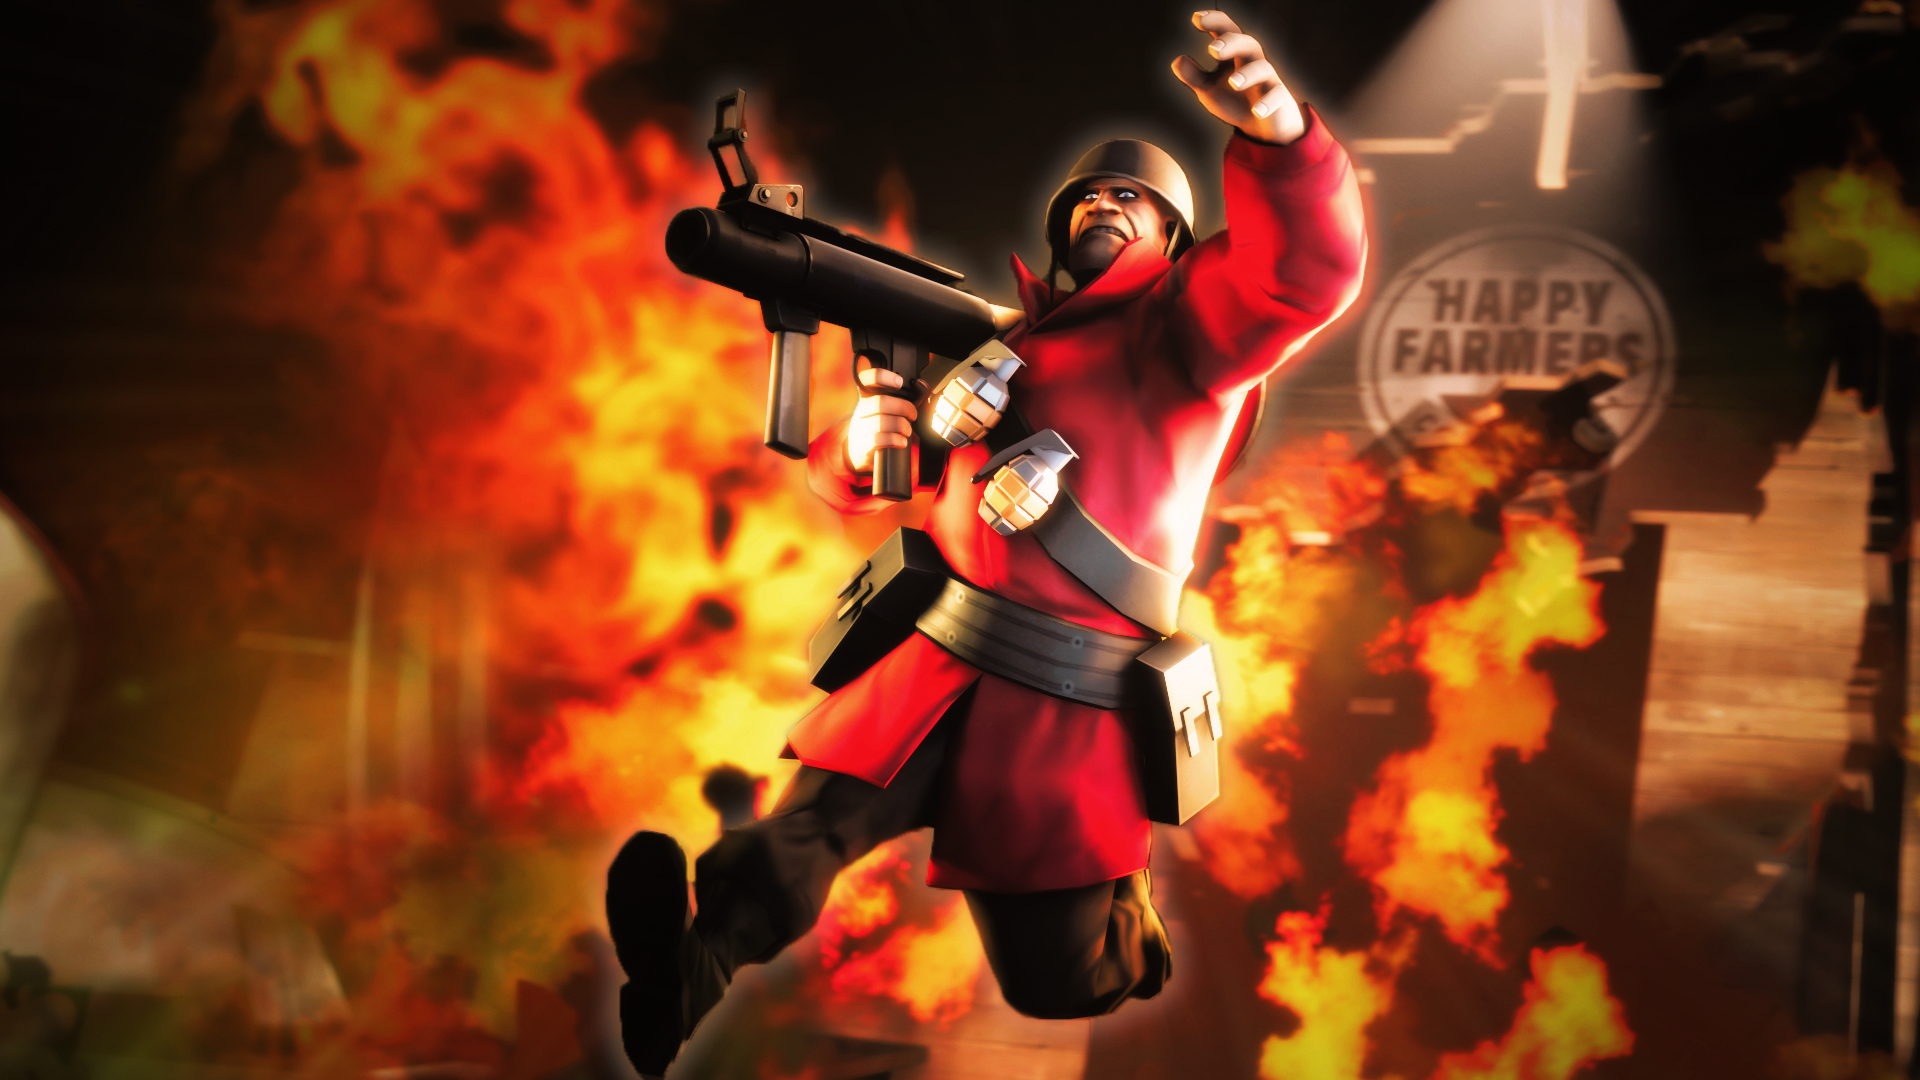 TF2 Soldier - Rocket Jump away by BrolyNo1Consorter on DeviantArt